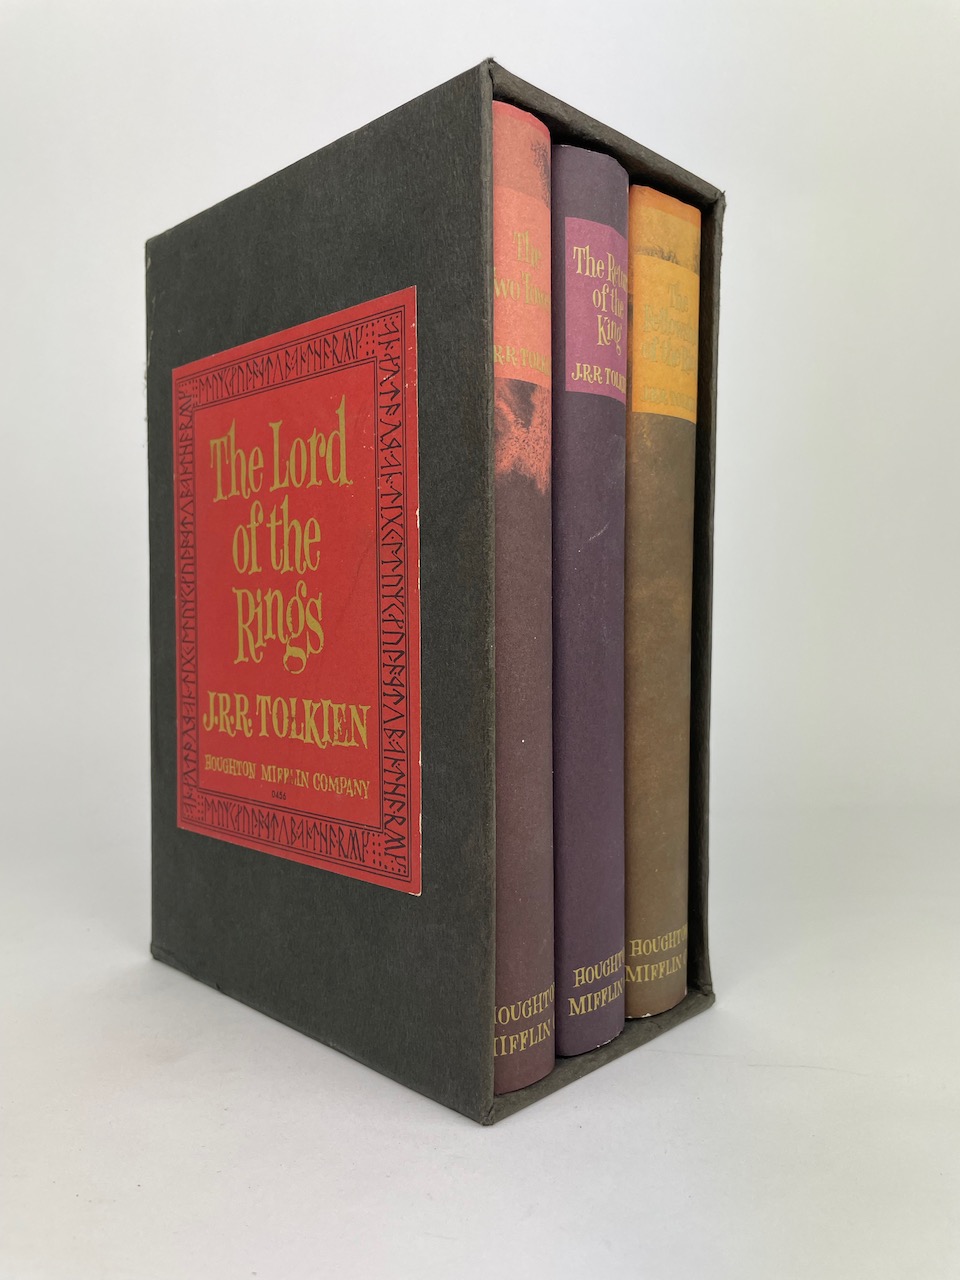 The Lord of the Rings, 2nd US Edition in Original Publishers Slipcase 9th/8th/8th